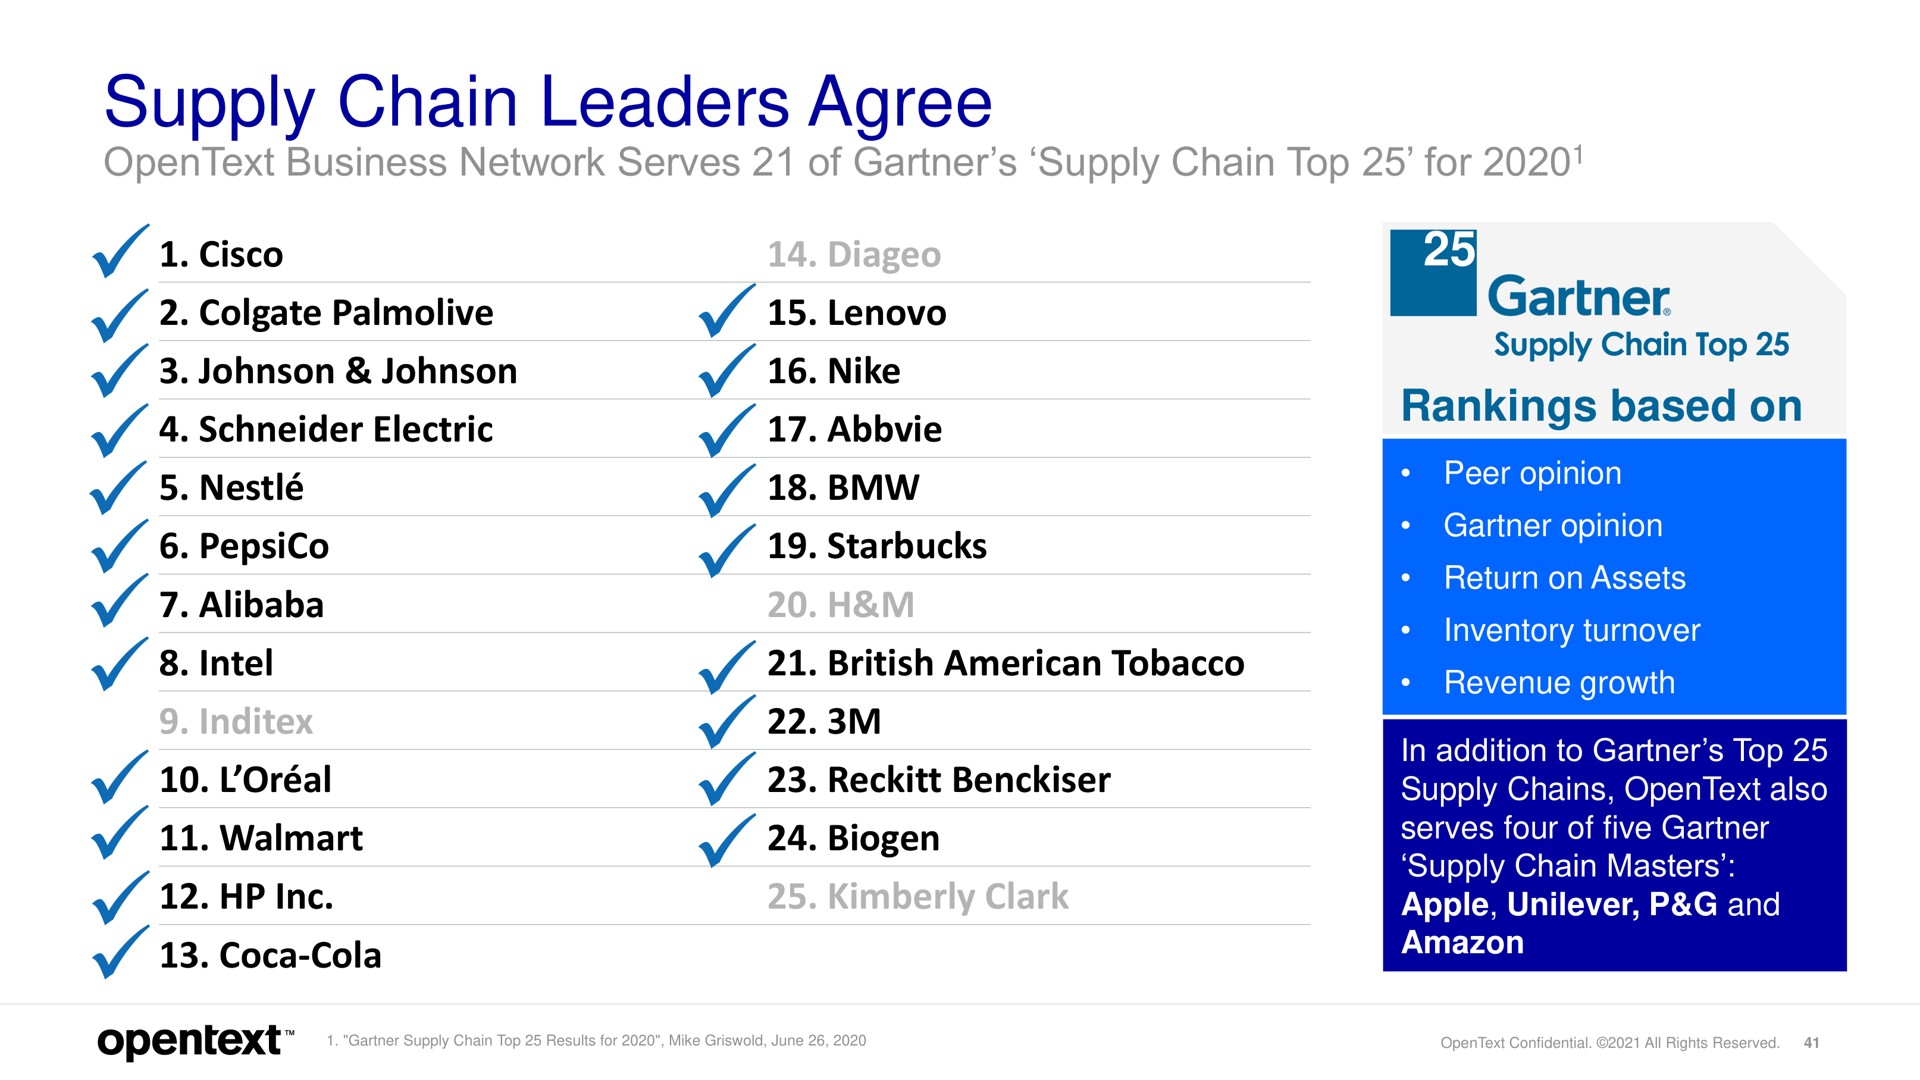 supply chain leaders agree | OpenText